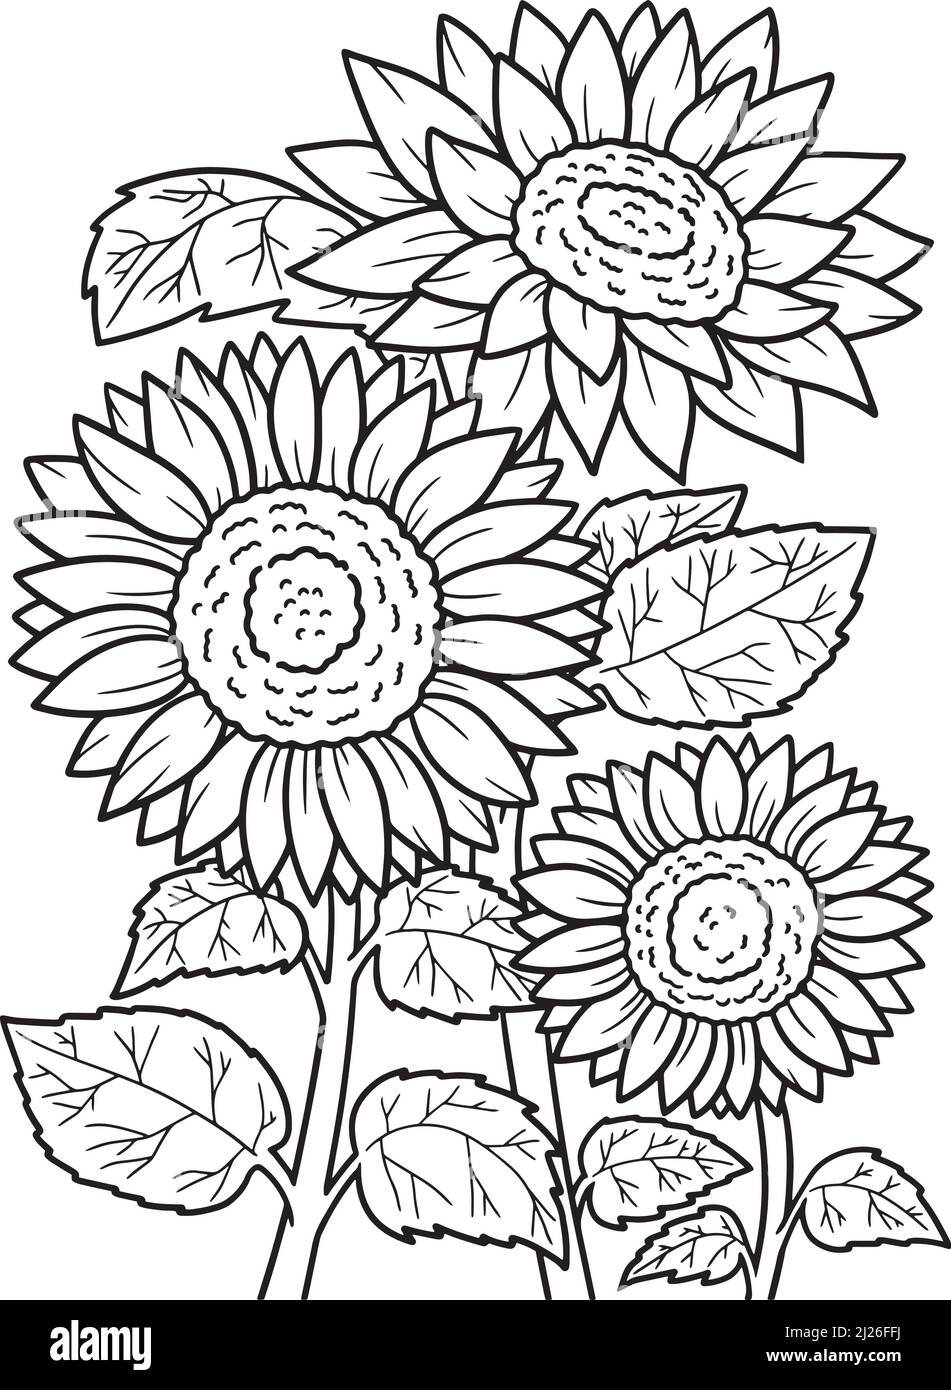 Sunflower Coloring Page for Adults Stock Vector